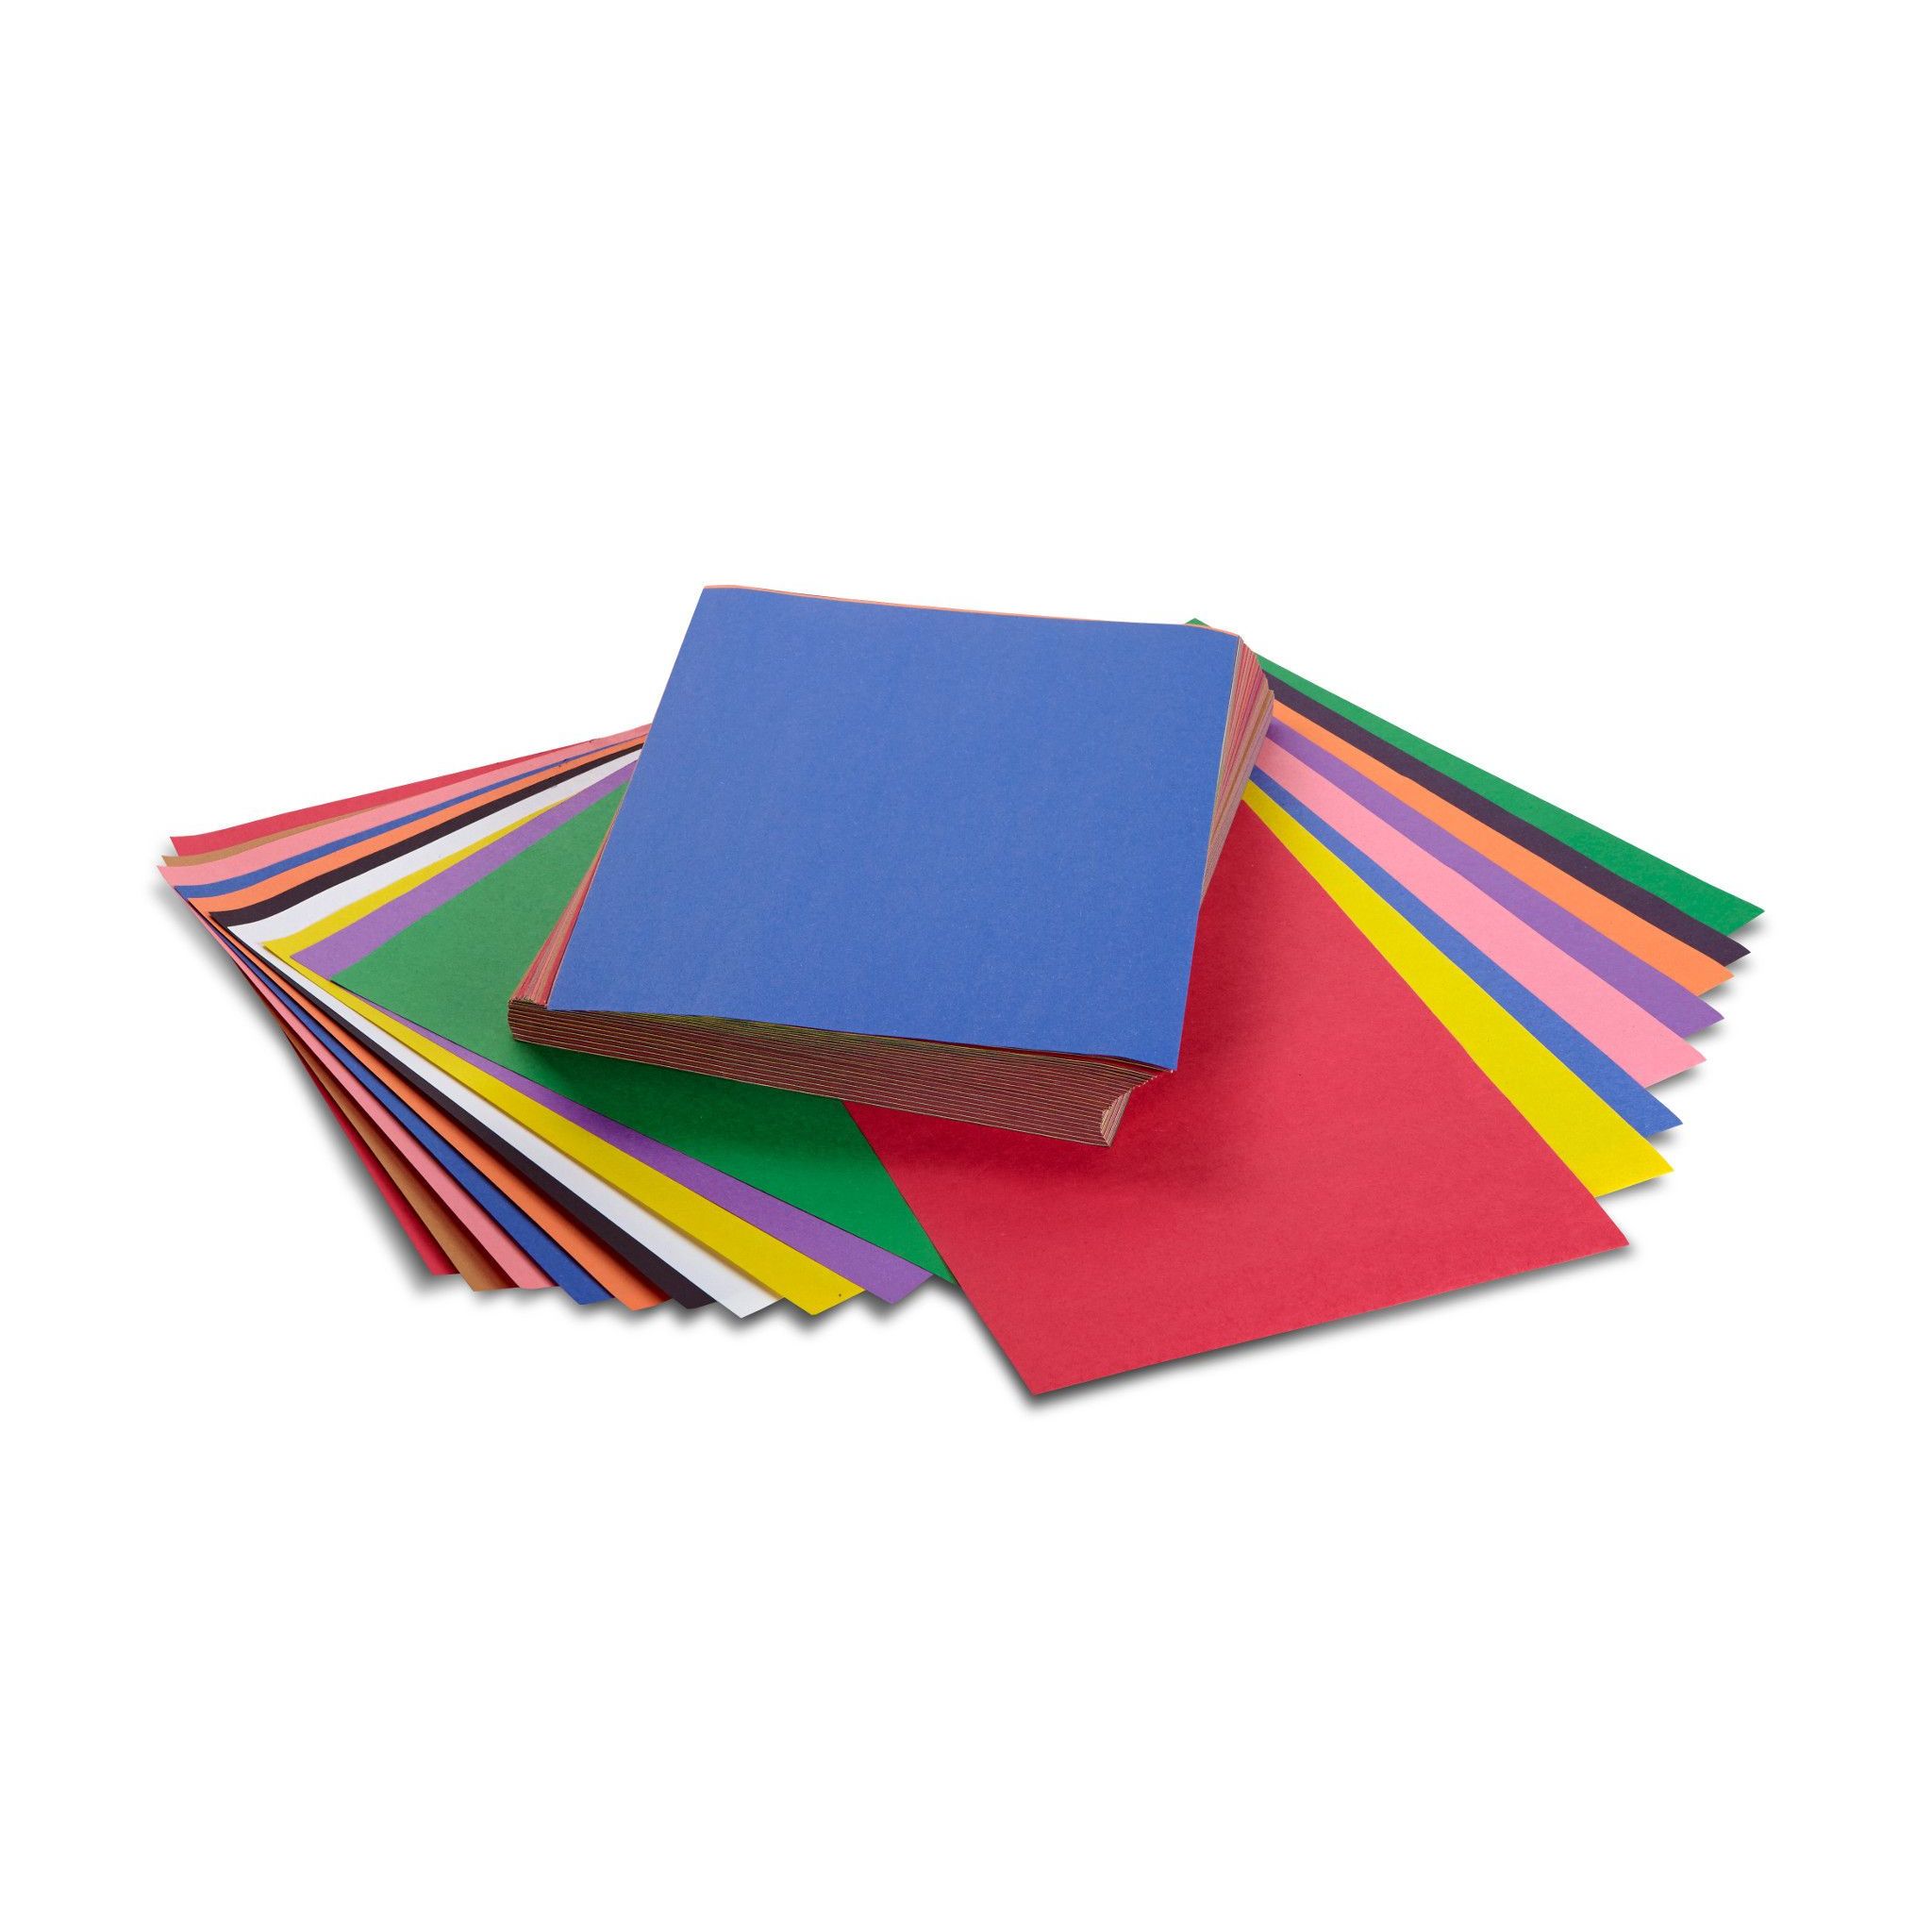 Crayola Construction Paper in 10 Assorted Colors, School Supplies, Beginner Child, 240 Sheets - image 5 of 8